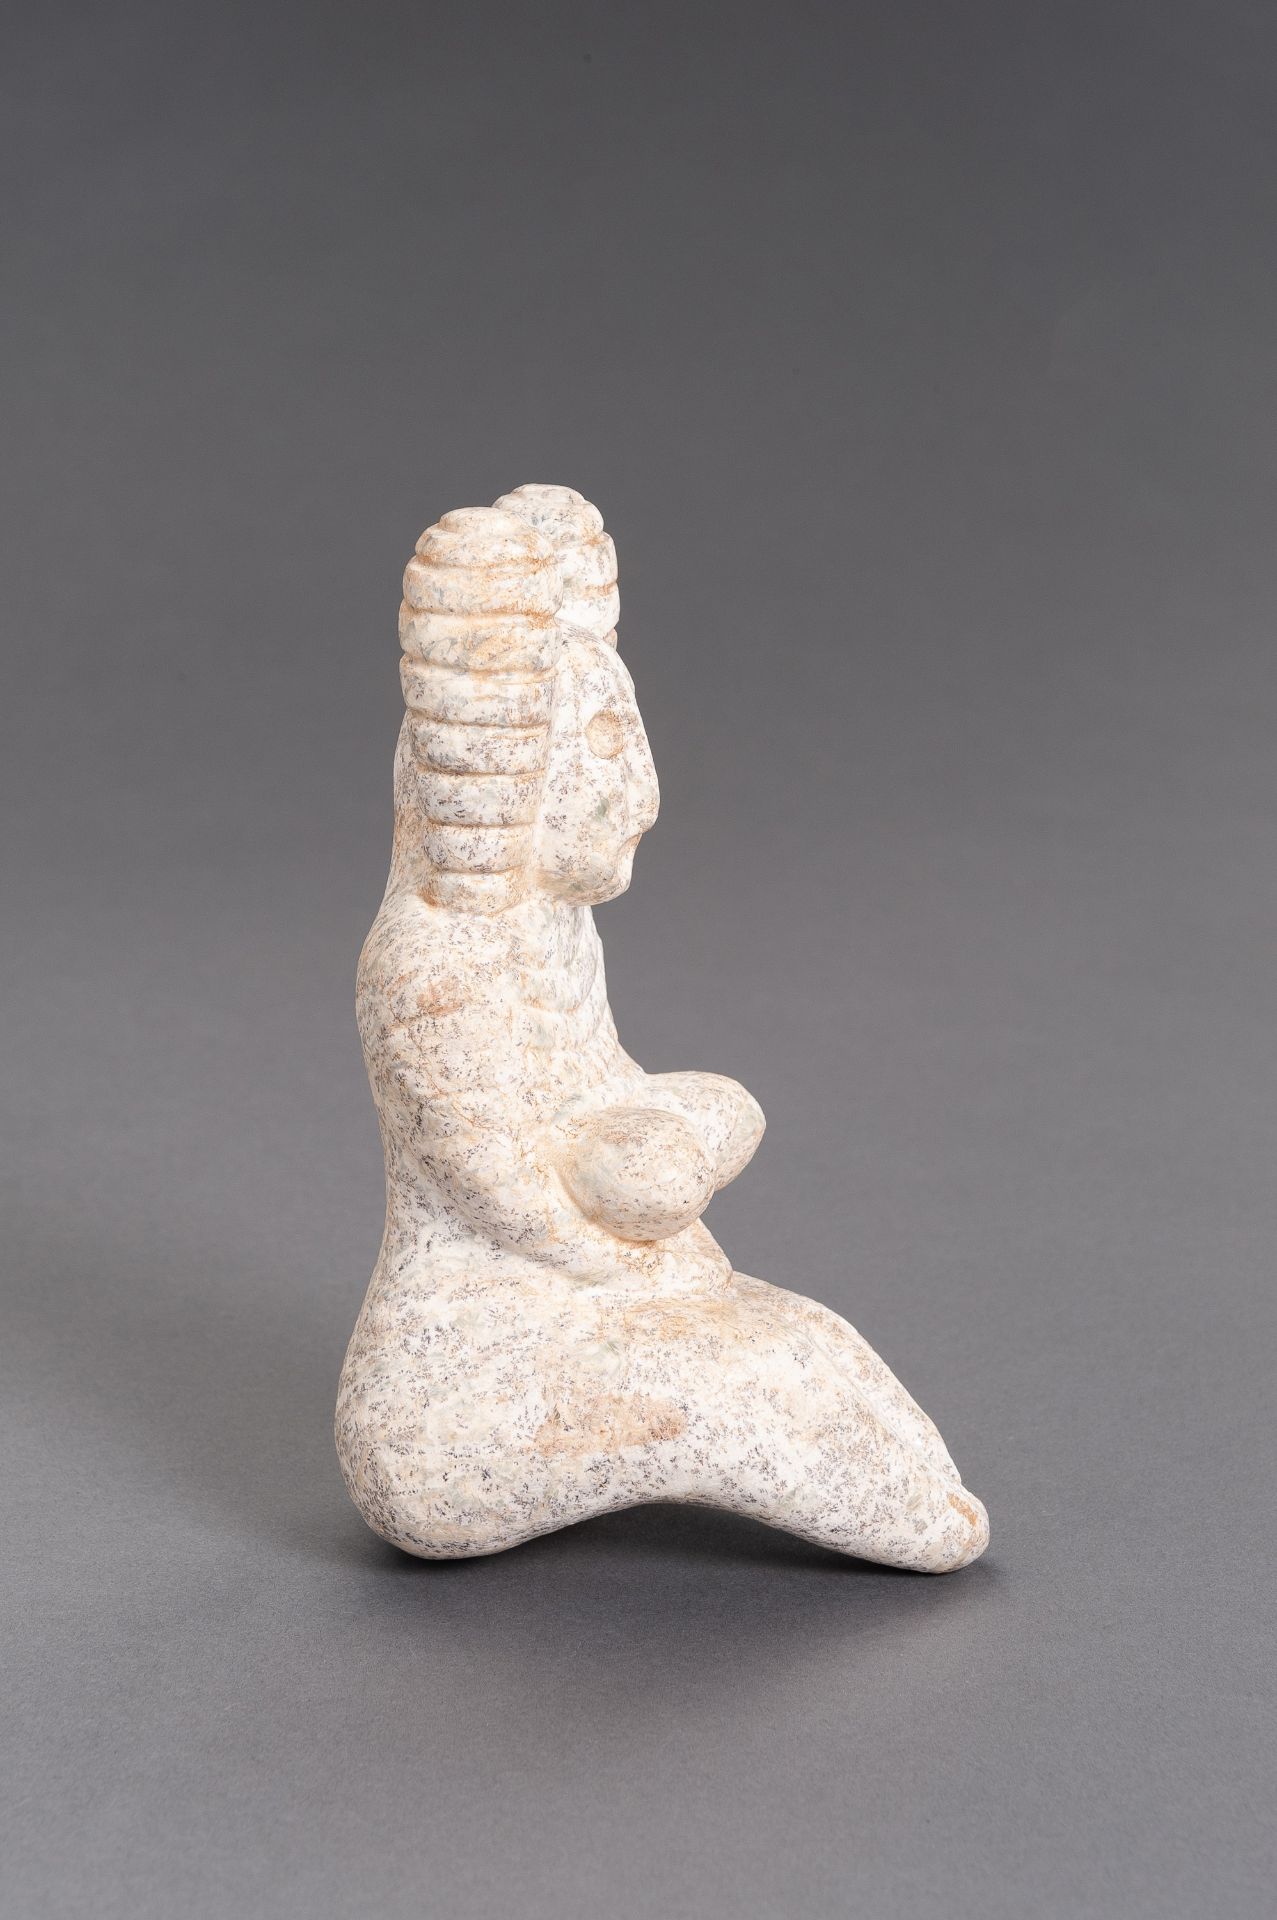 A STONE INDUS VALLEY STYLE FIGURE OF A FERTILITY GODDESS - Image 4 of 9